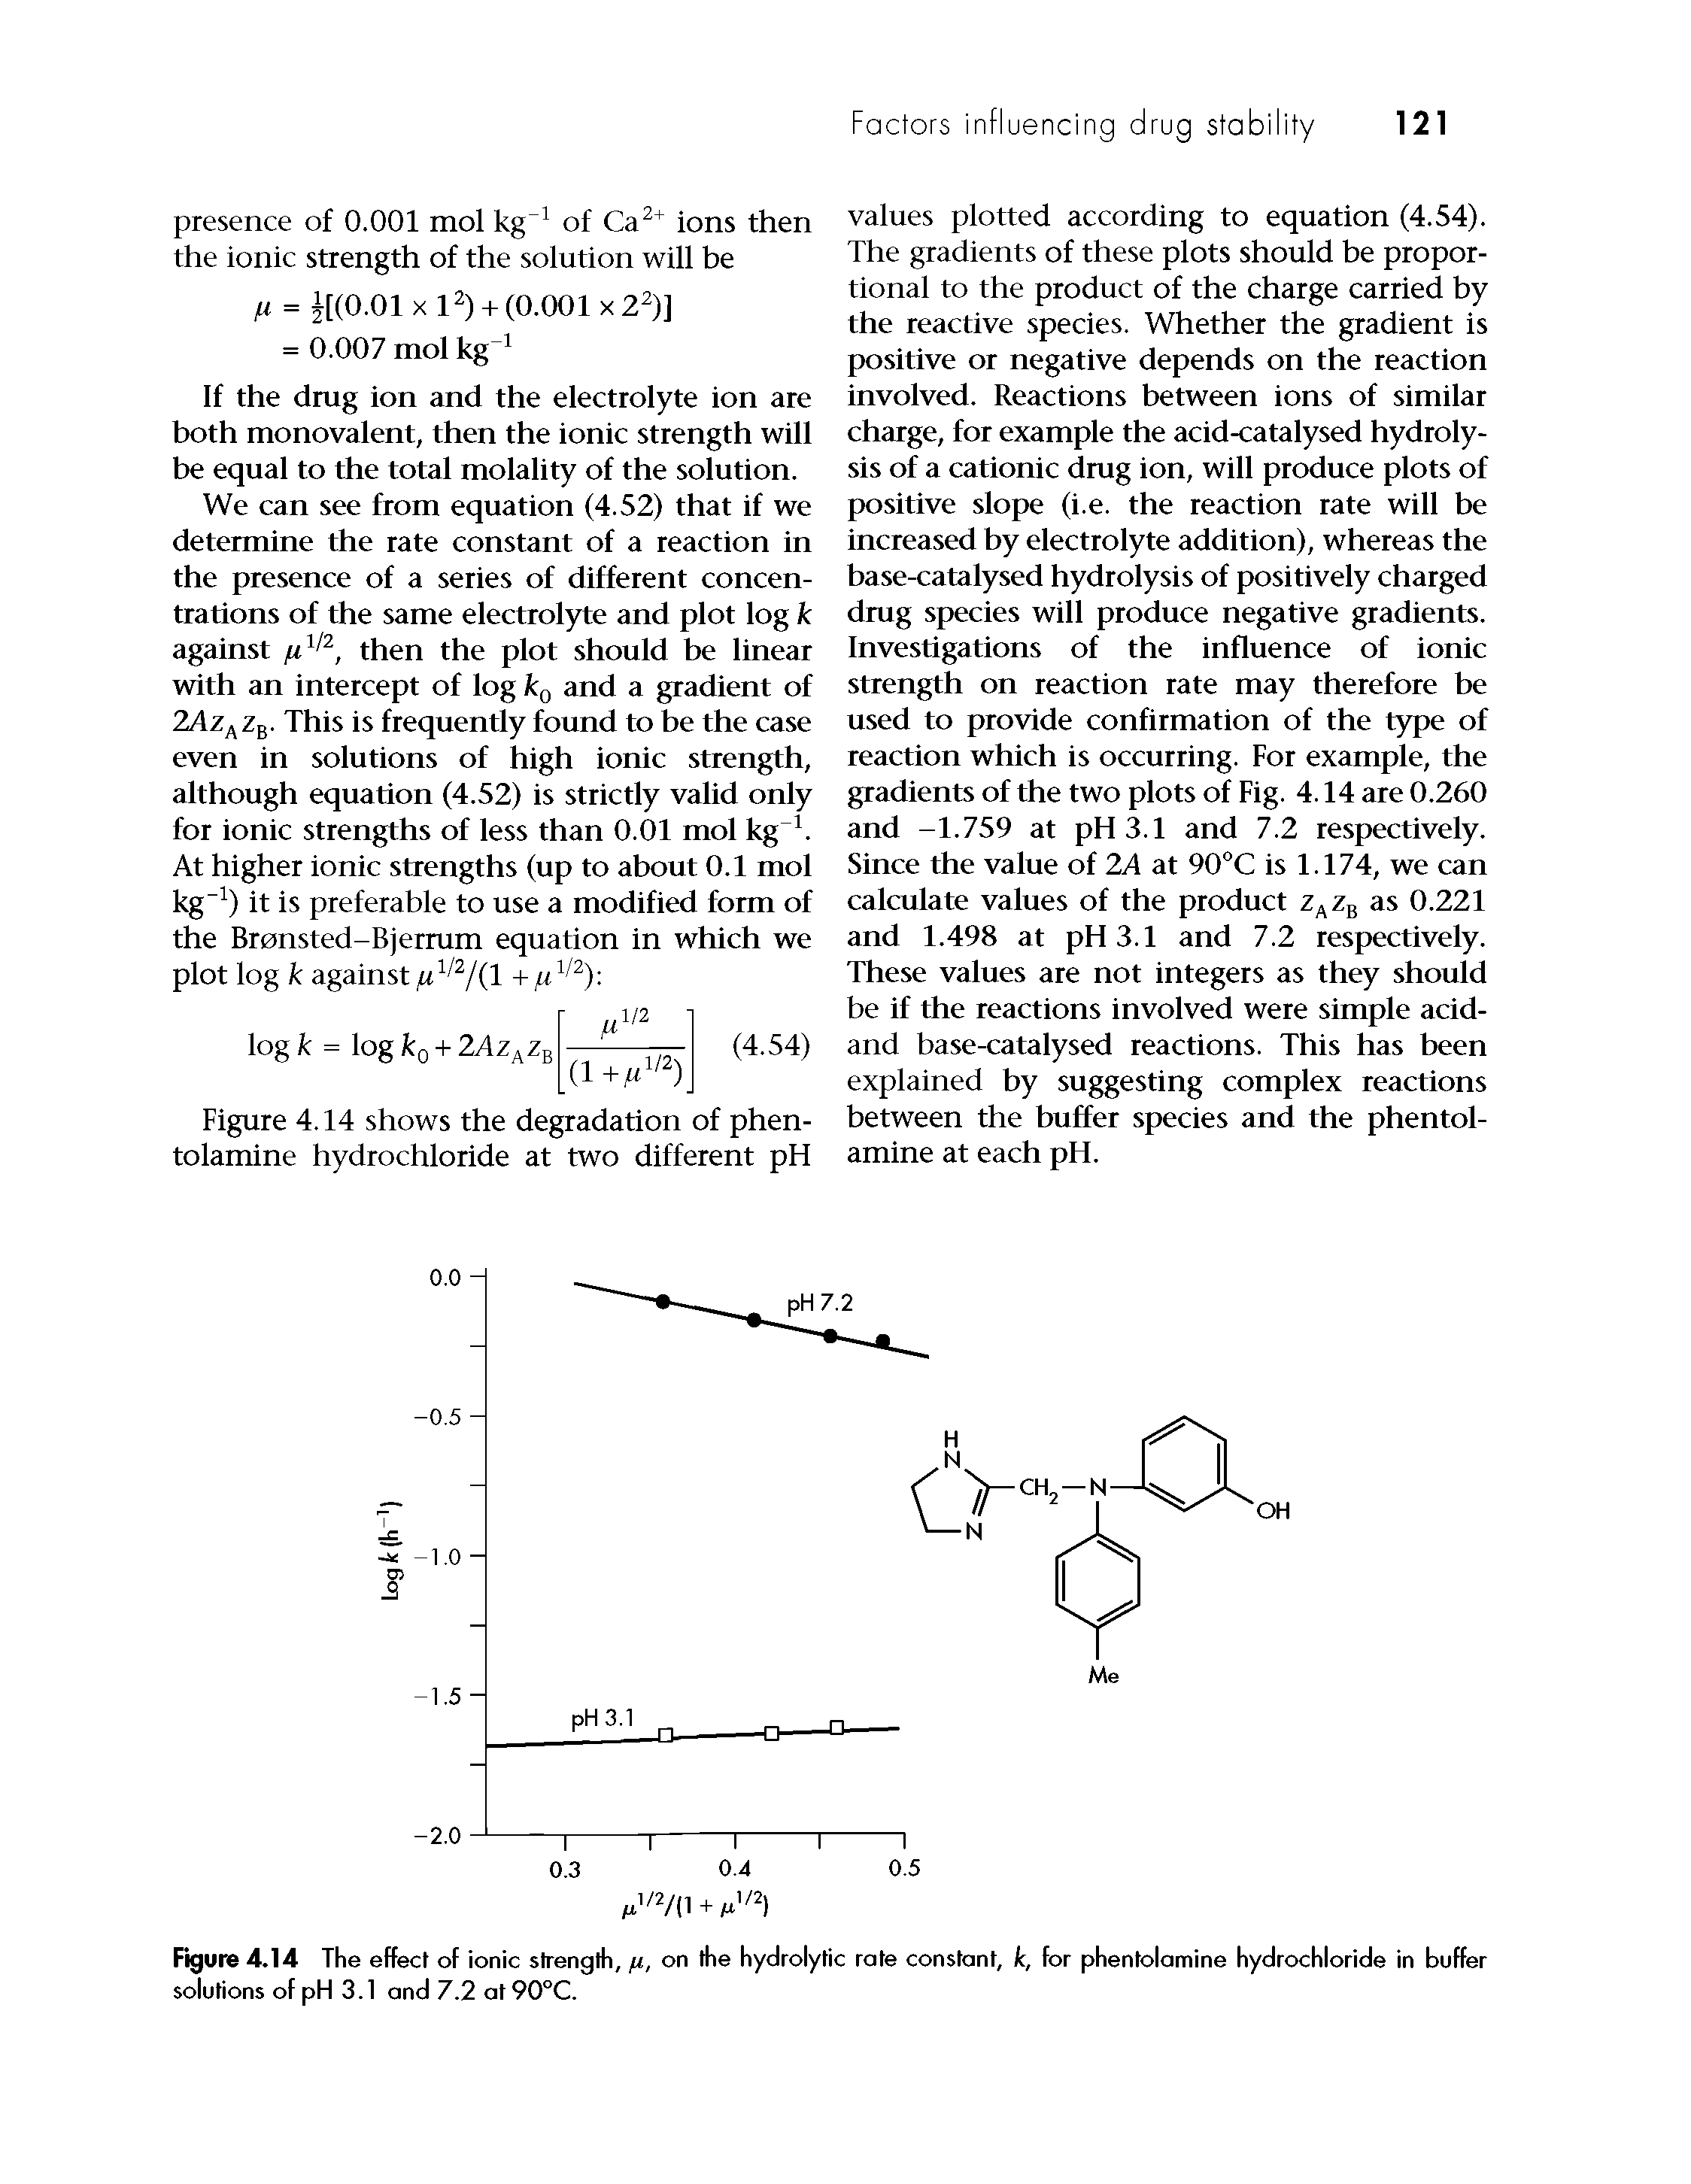 Figure 4.14 The effect of ionic strength, pi, on the hydrolytic rate constant, k, for phentolamine hydrochloride in buffer solutions of pH 3.1 and 7.2 at 90°C.